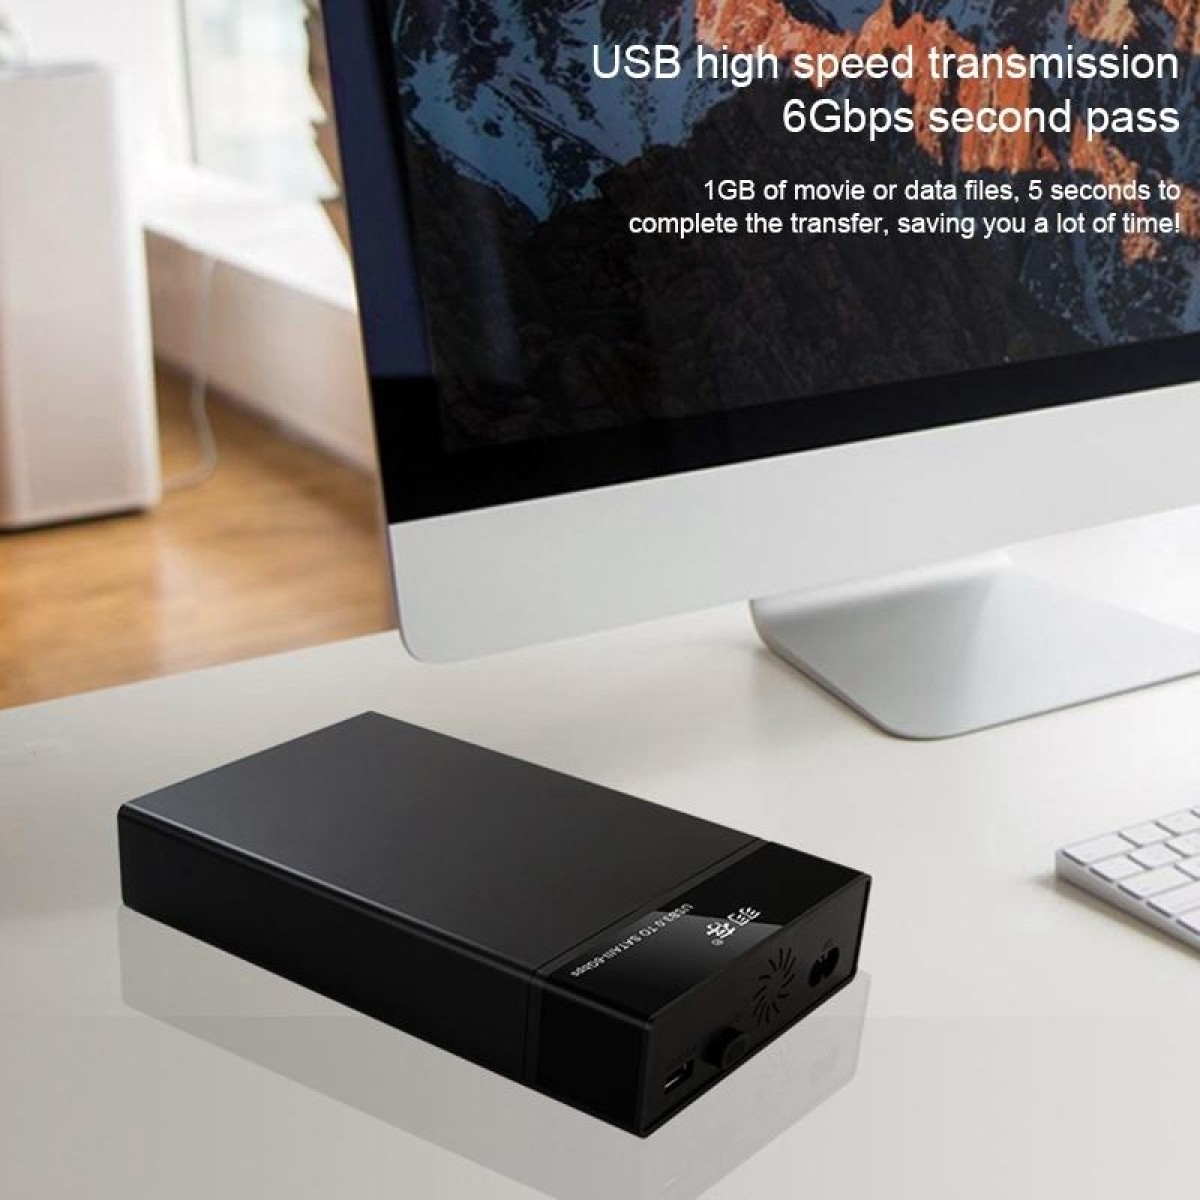 Universal SATA 2.5 / 3.5 inch USB3.0 Interface External Solid State Drive Enclosure for Laptops / Desktop Computers, The Maximum Support Capacity: 10TB